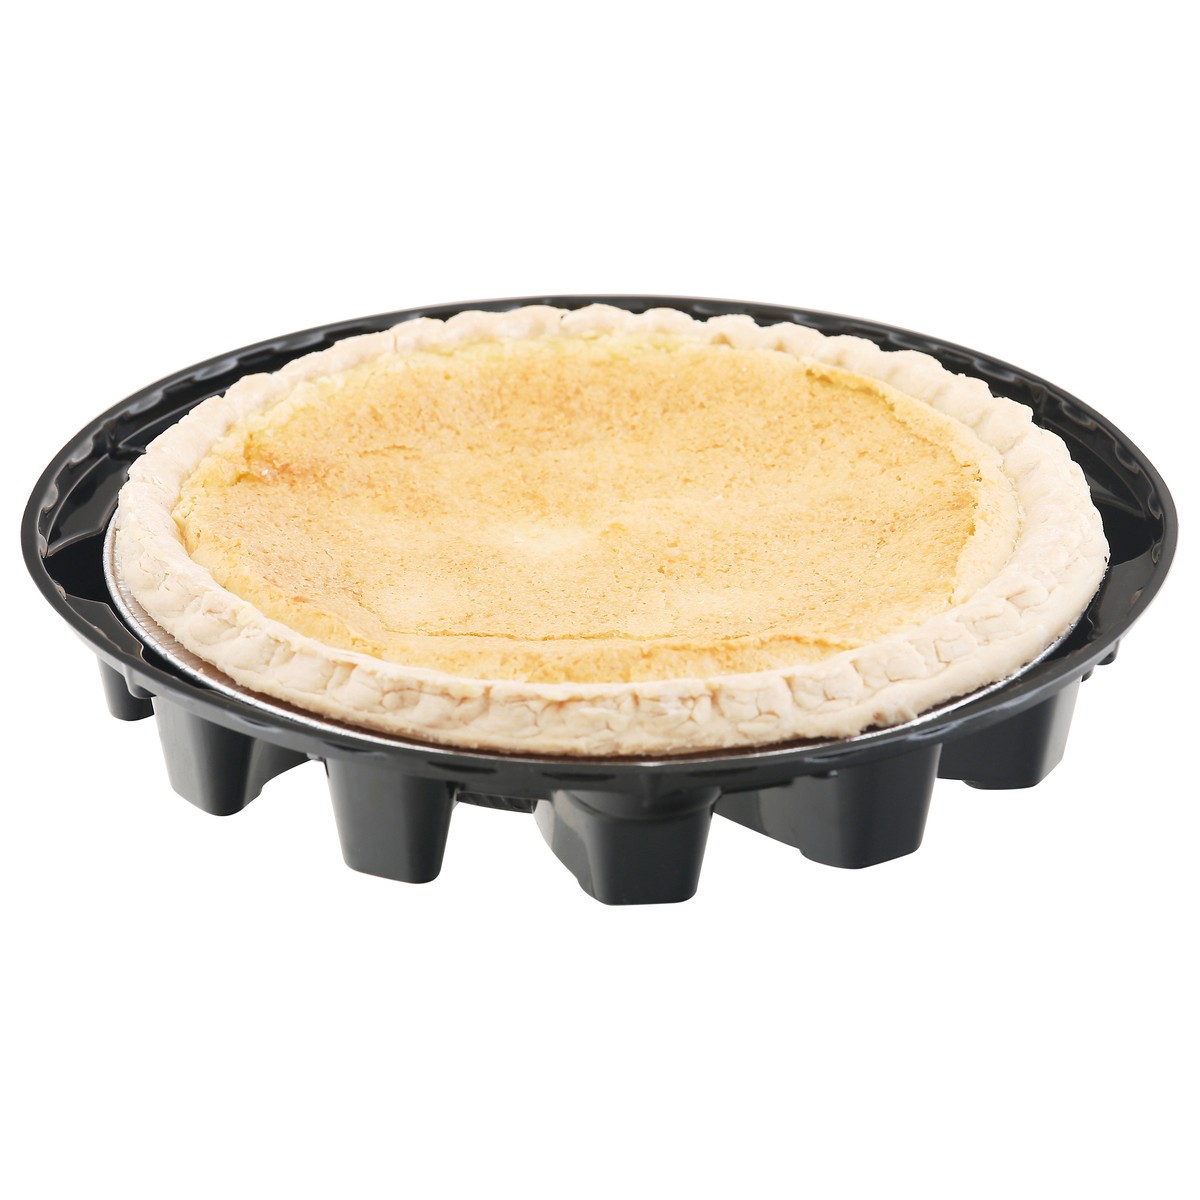 slide 4 of 11, Quality Bakery Products 8 Inch Buttermilk Chess Pie 23 oz Tray, 22 oz